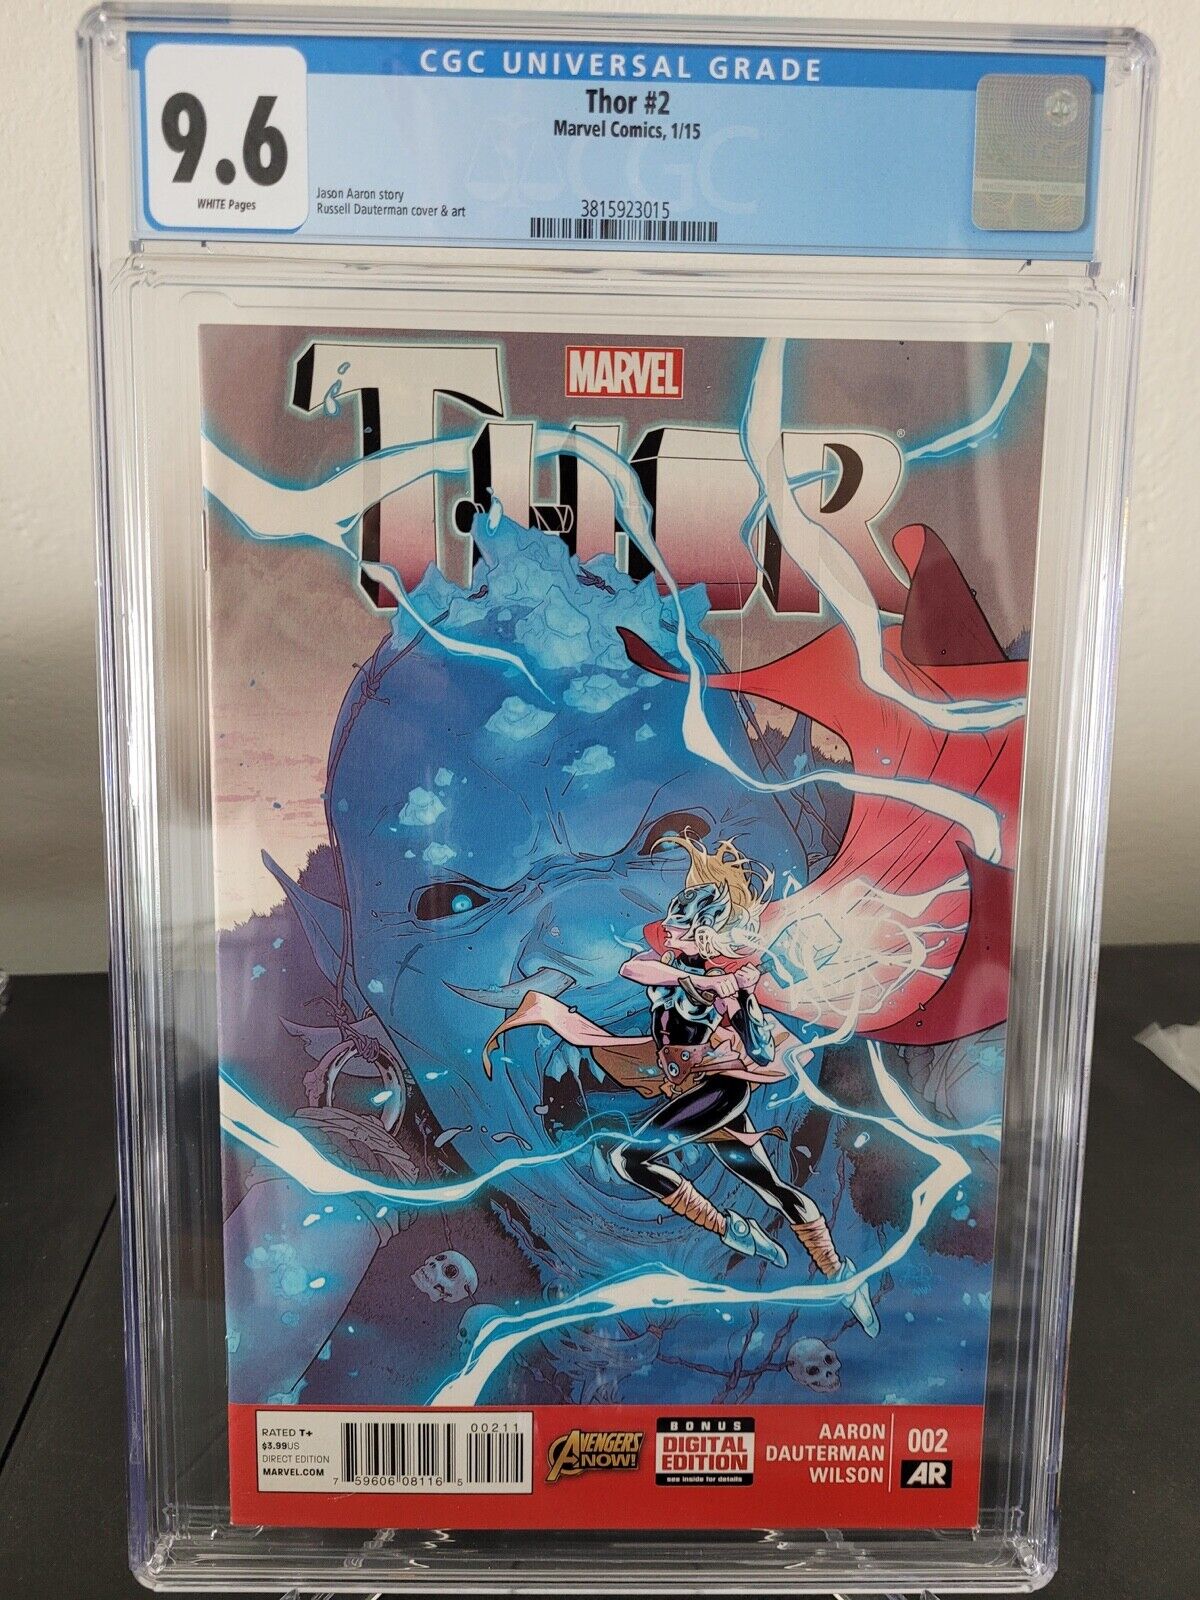 THOR #2 CGC 9.6 GRADED 2015 MARVEL 1ST FULL APPEARANCE OF JAN FOSTER AS THOR